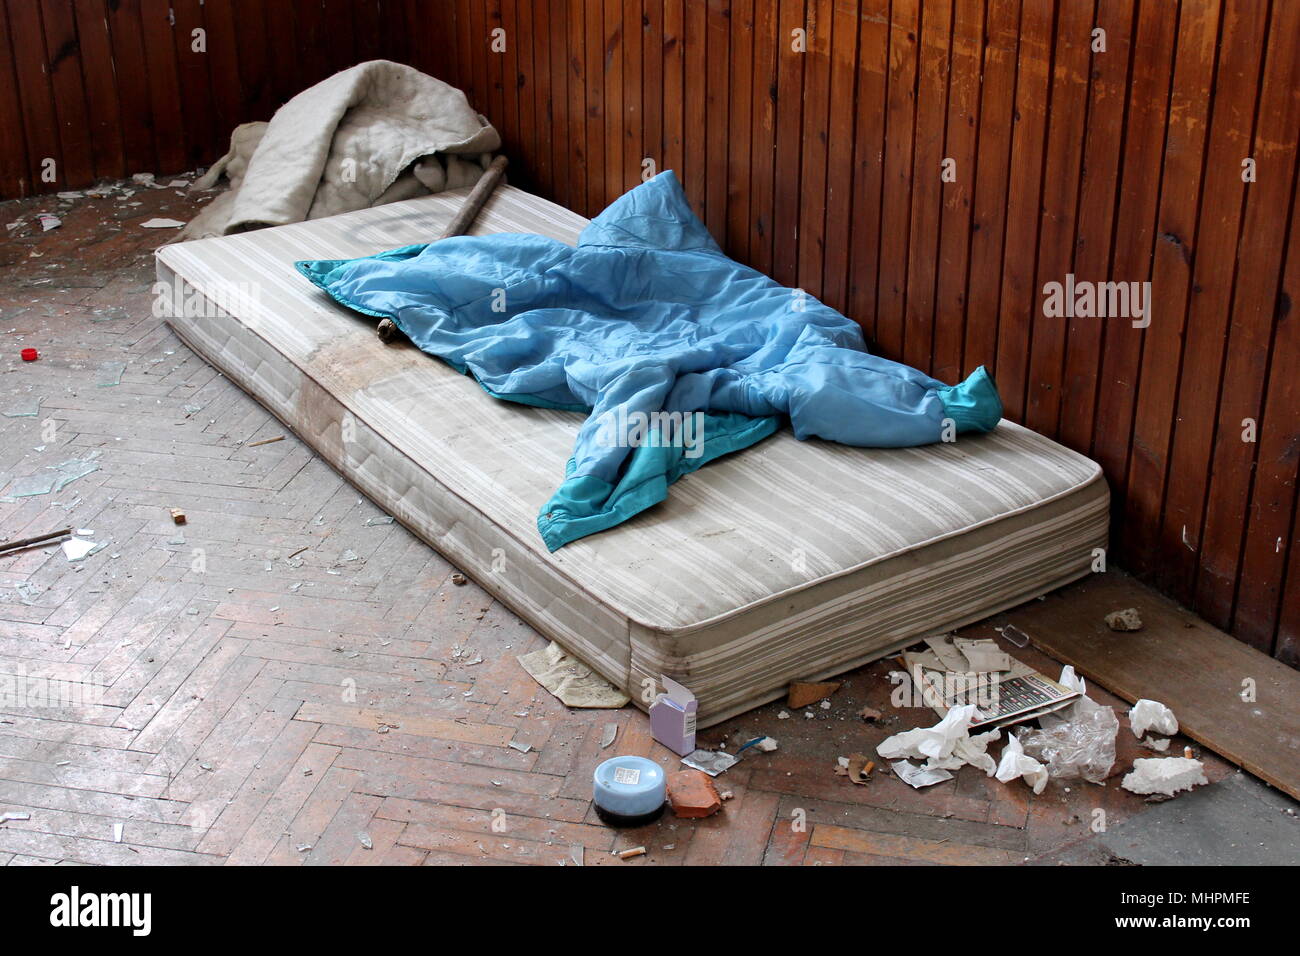 Abandoned room with old mattress, cover, stick, hand lotion, open condom wrappers, tissues, old newspaper, broken glass and garbage used by homeless a Stock Photo